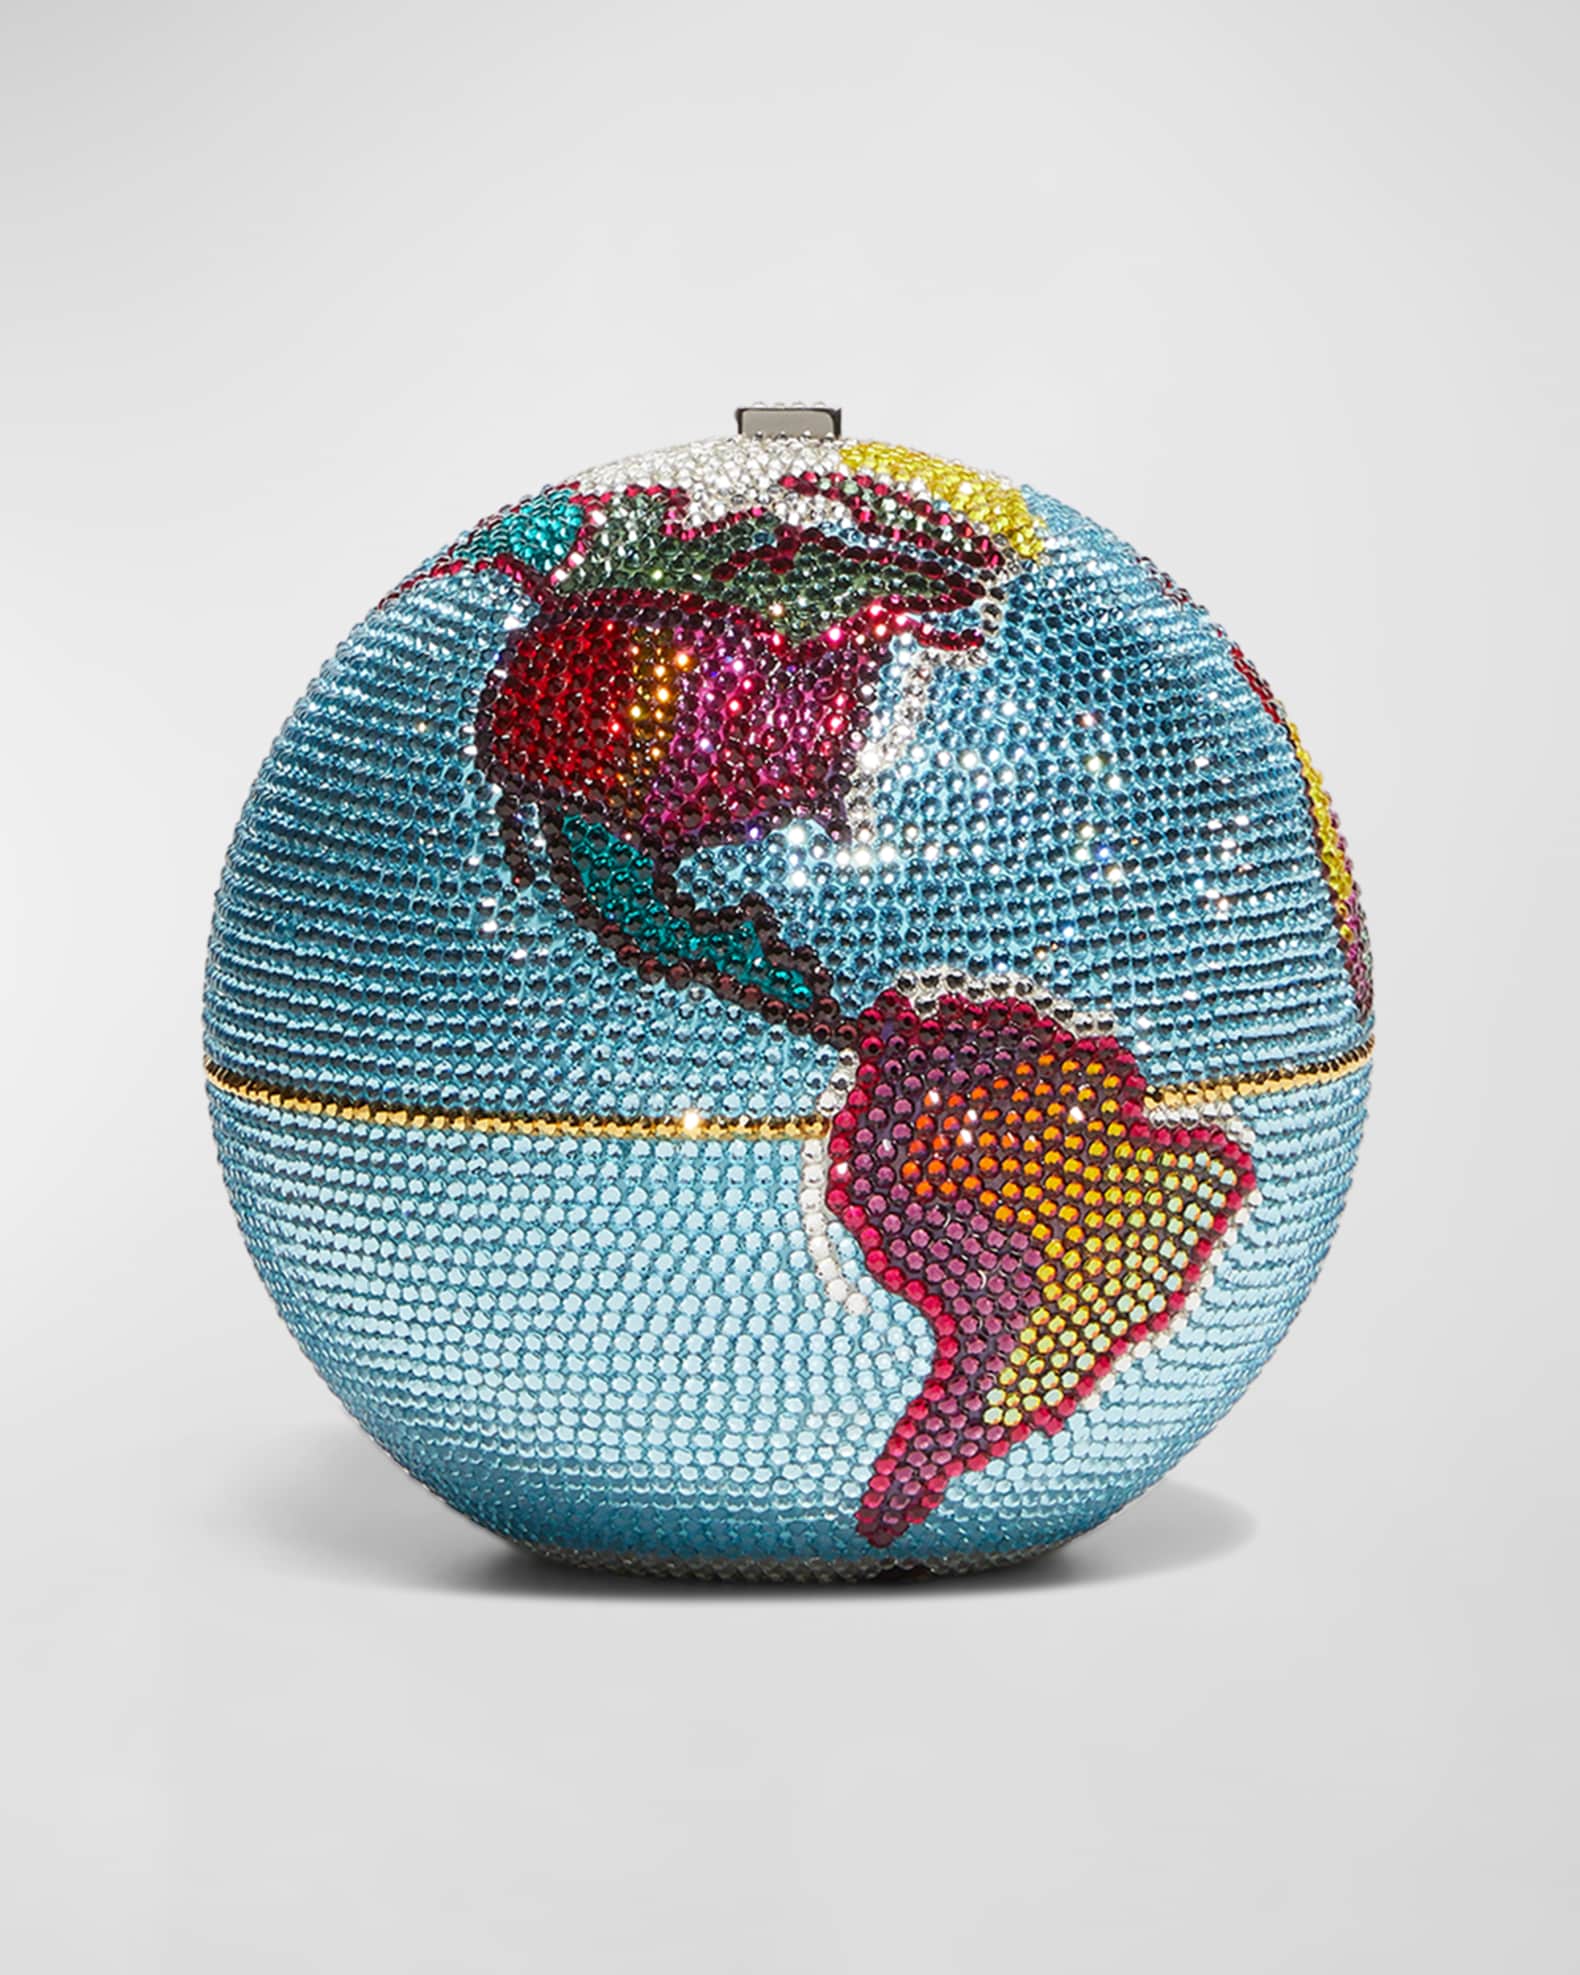 Judith Leiber Couture New Sphere Globe Crystal Clutch Bag | Neiman Marcus